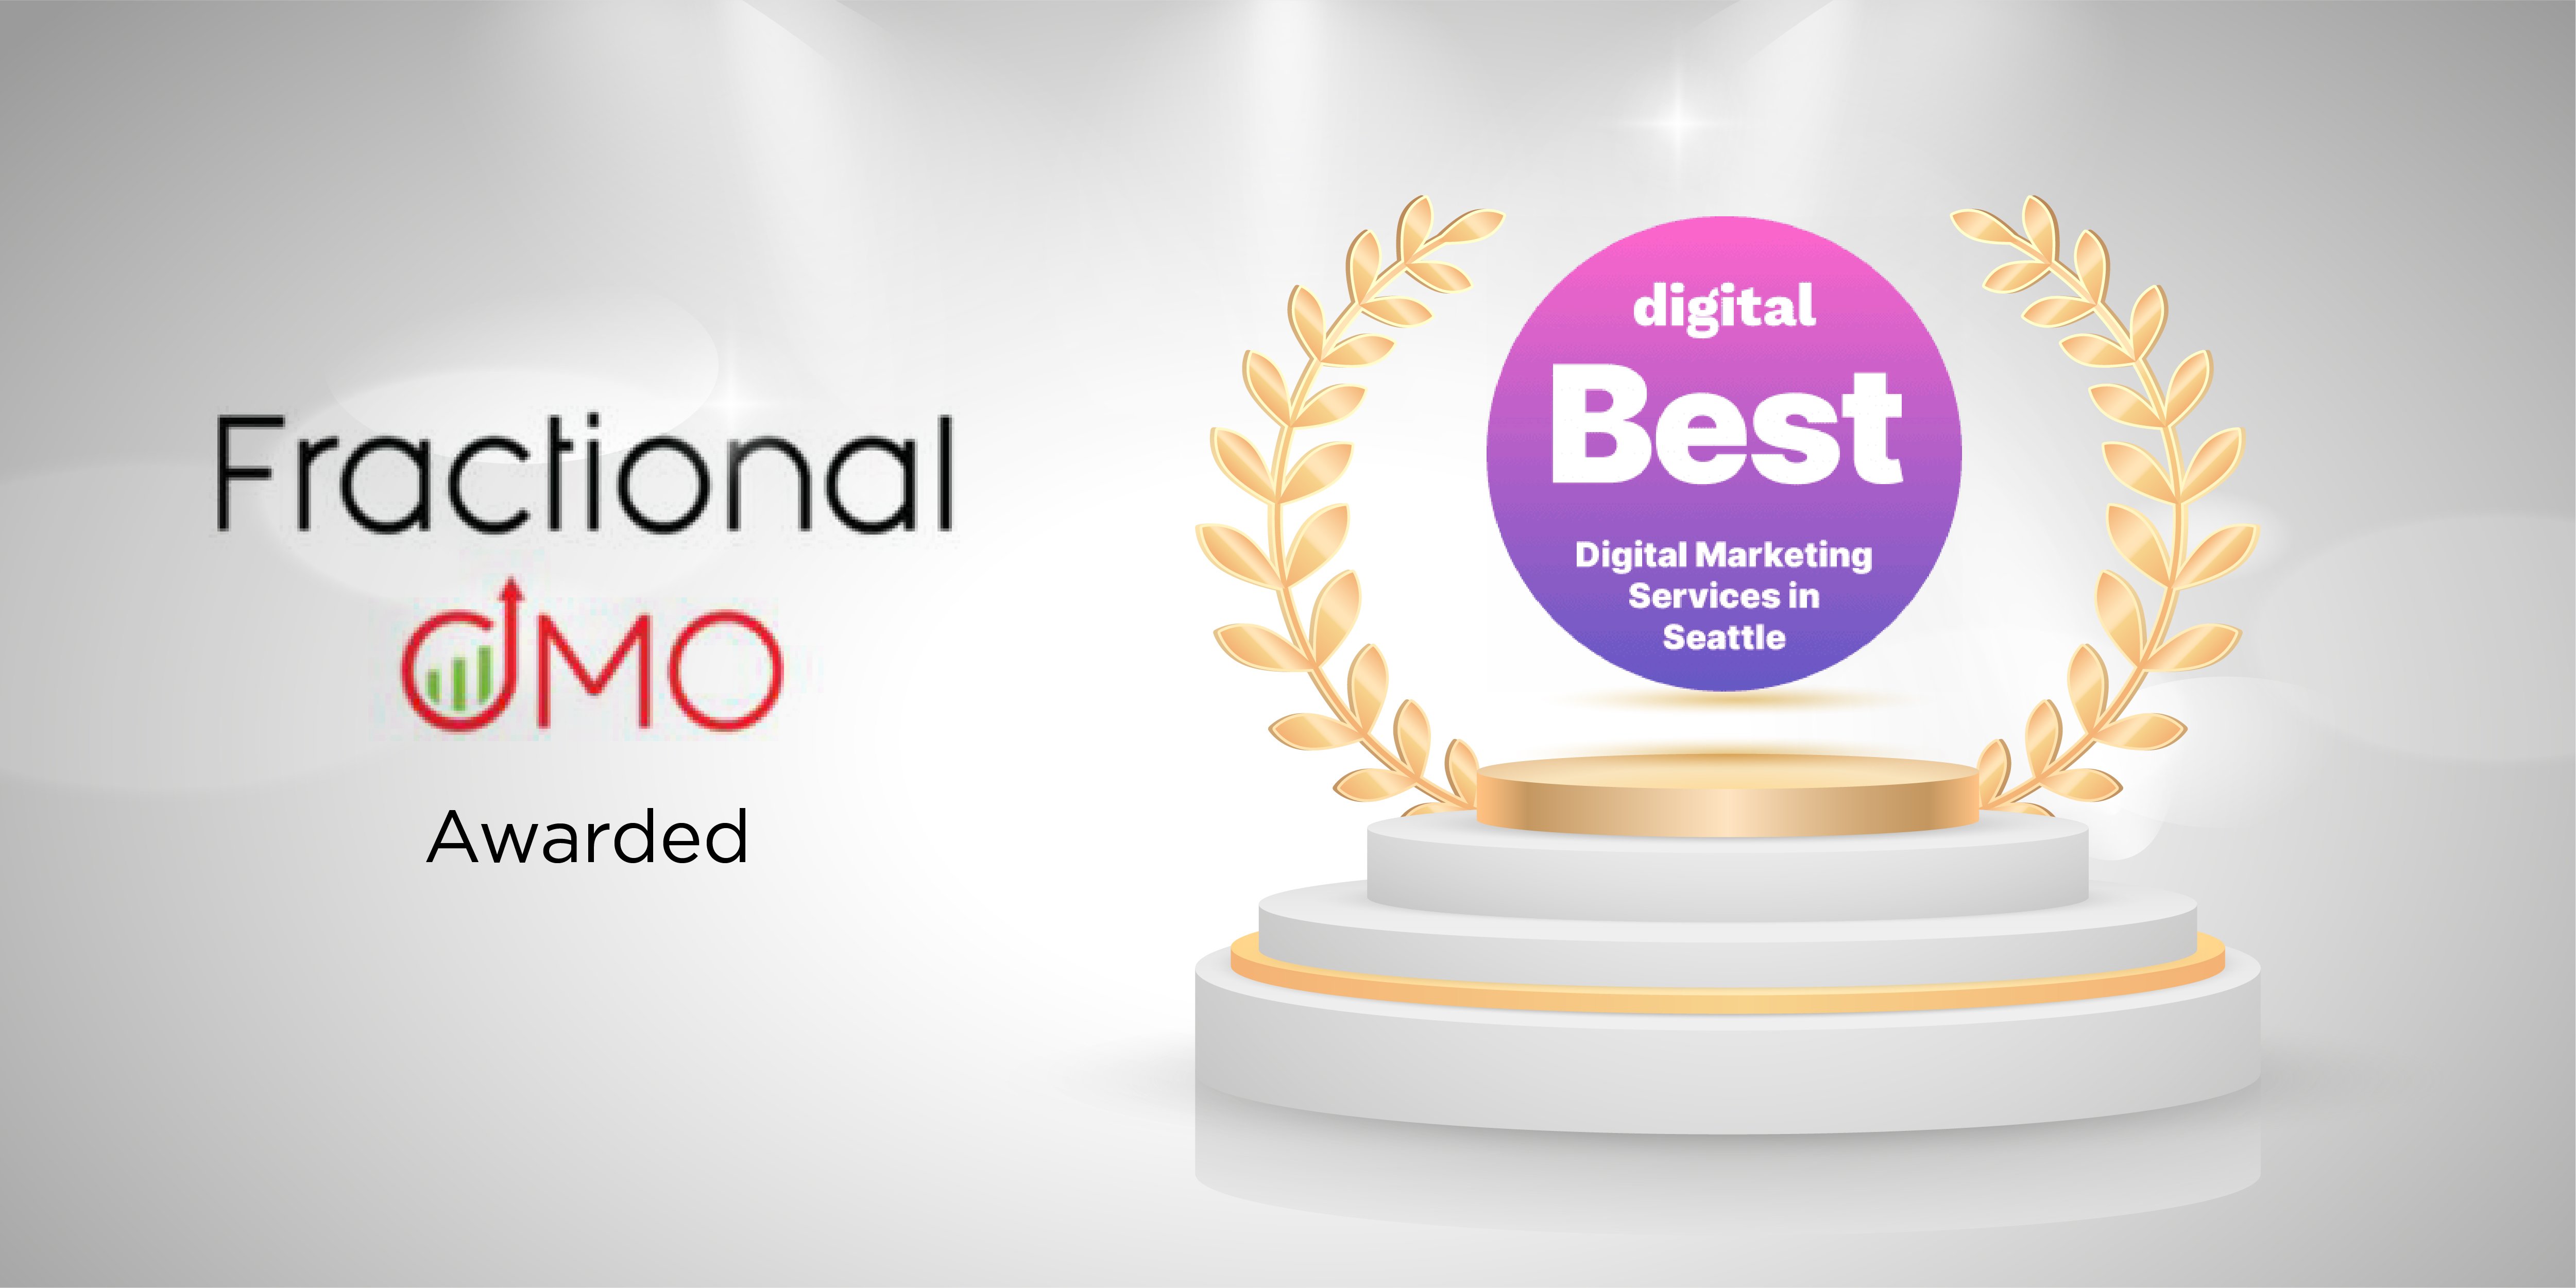 Fractional CMO Recognized Best Digital Marketing Firm in Seattle by ...